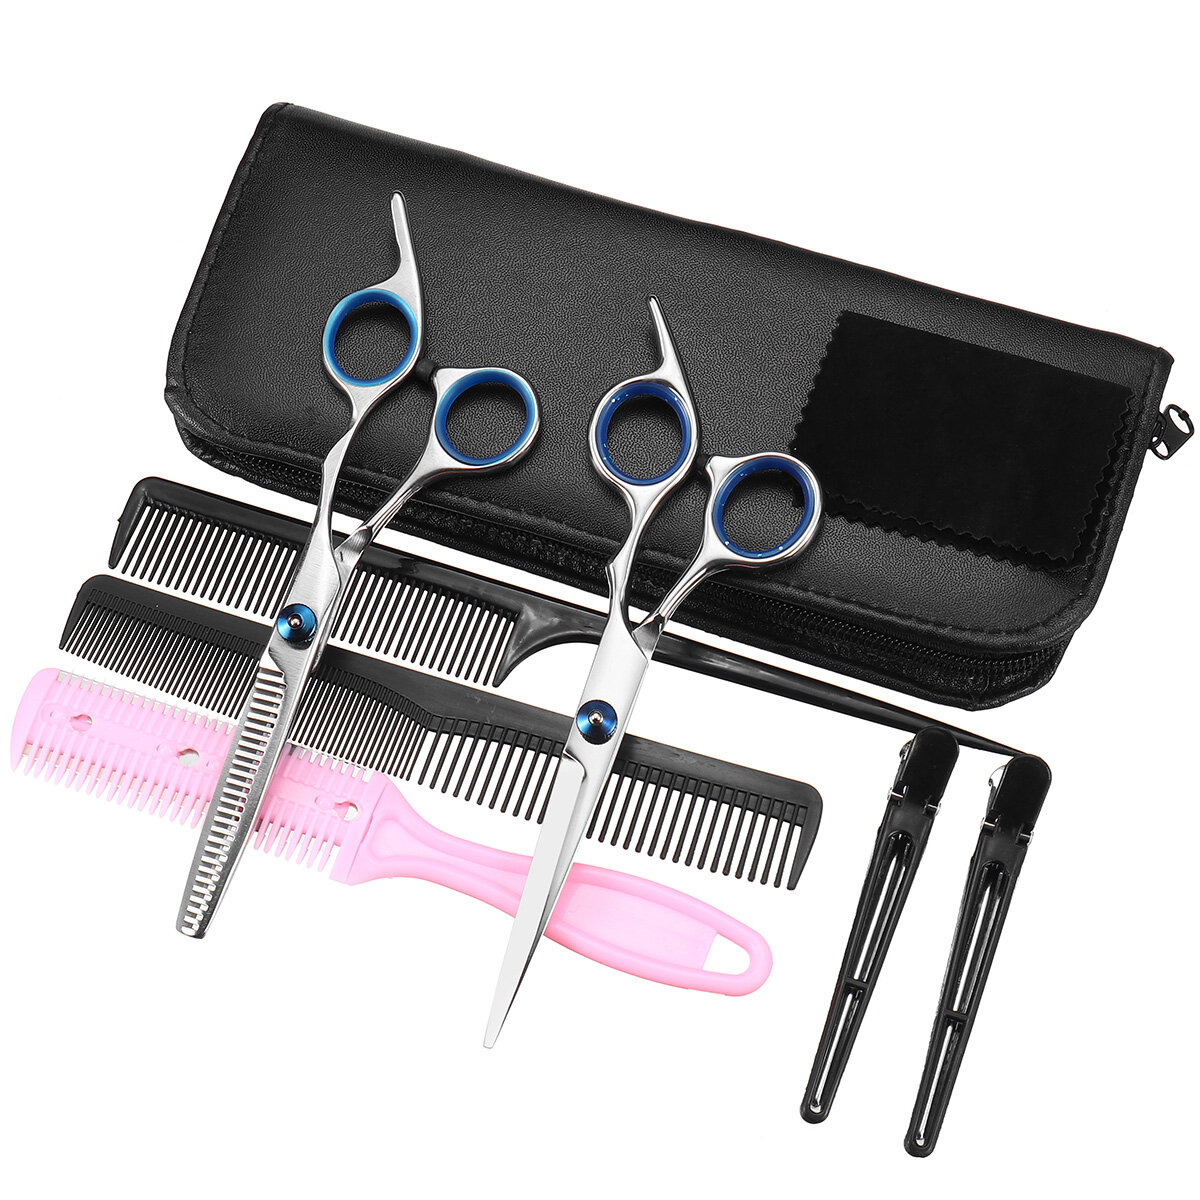 

9pcs Professional Hairdressing Scissors Set Hair Cut Thinning Shears Comb Hairpins